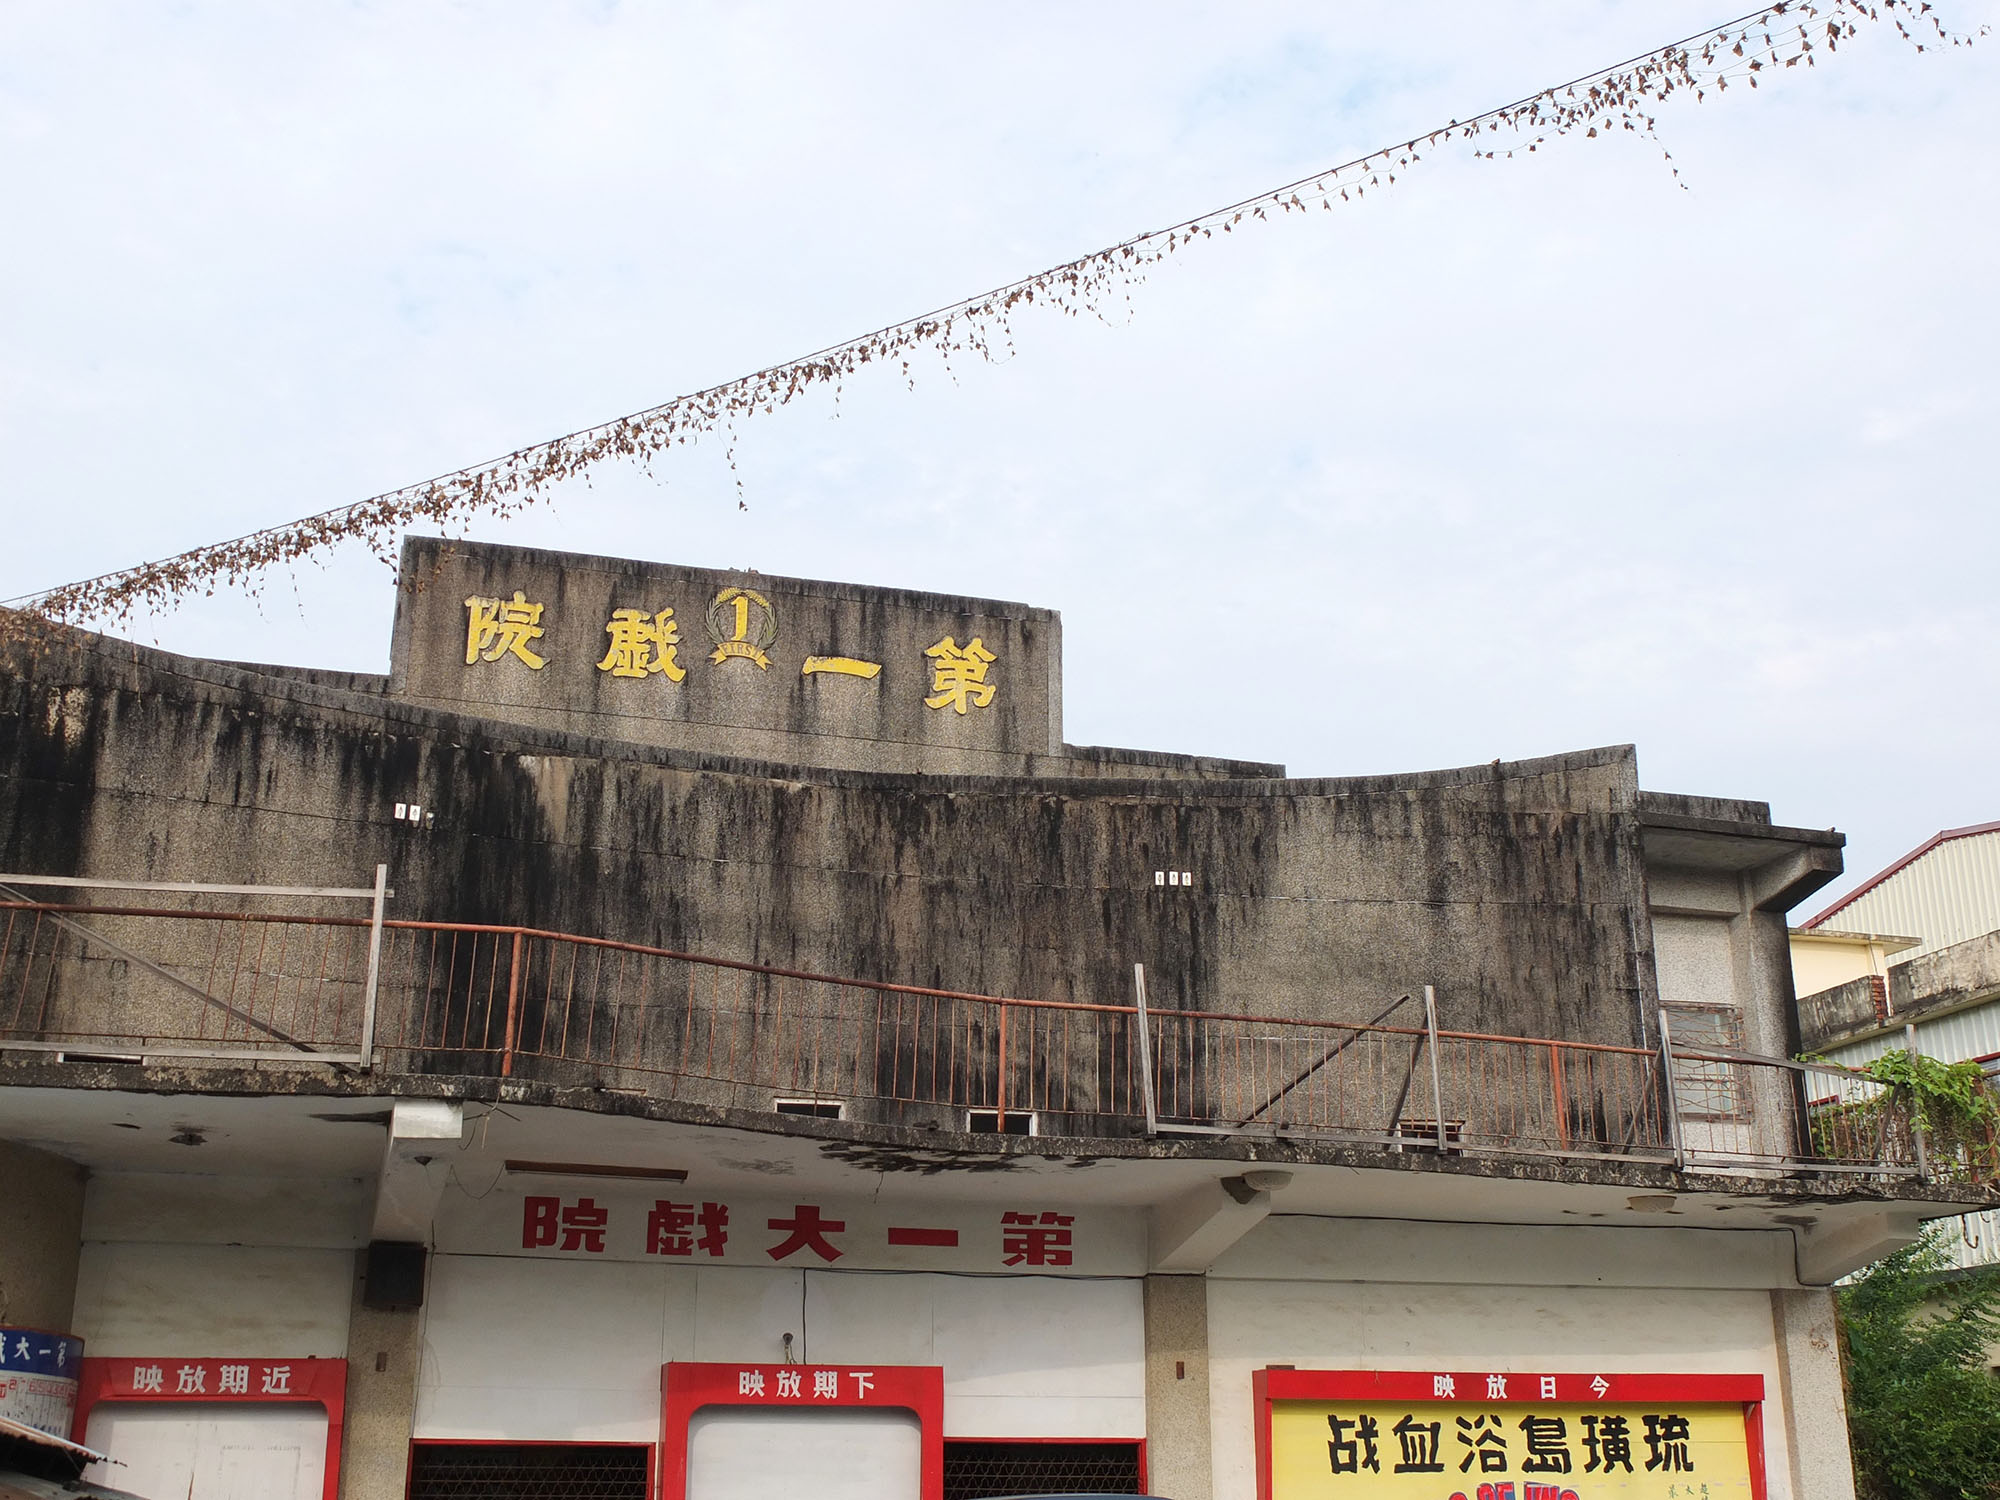 the closed Meinong First Theater